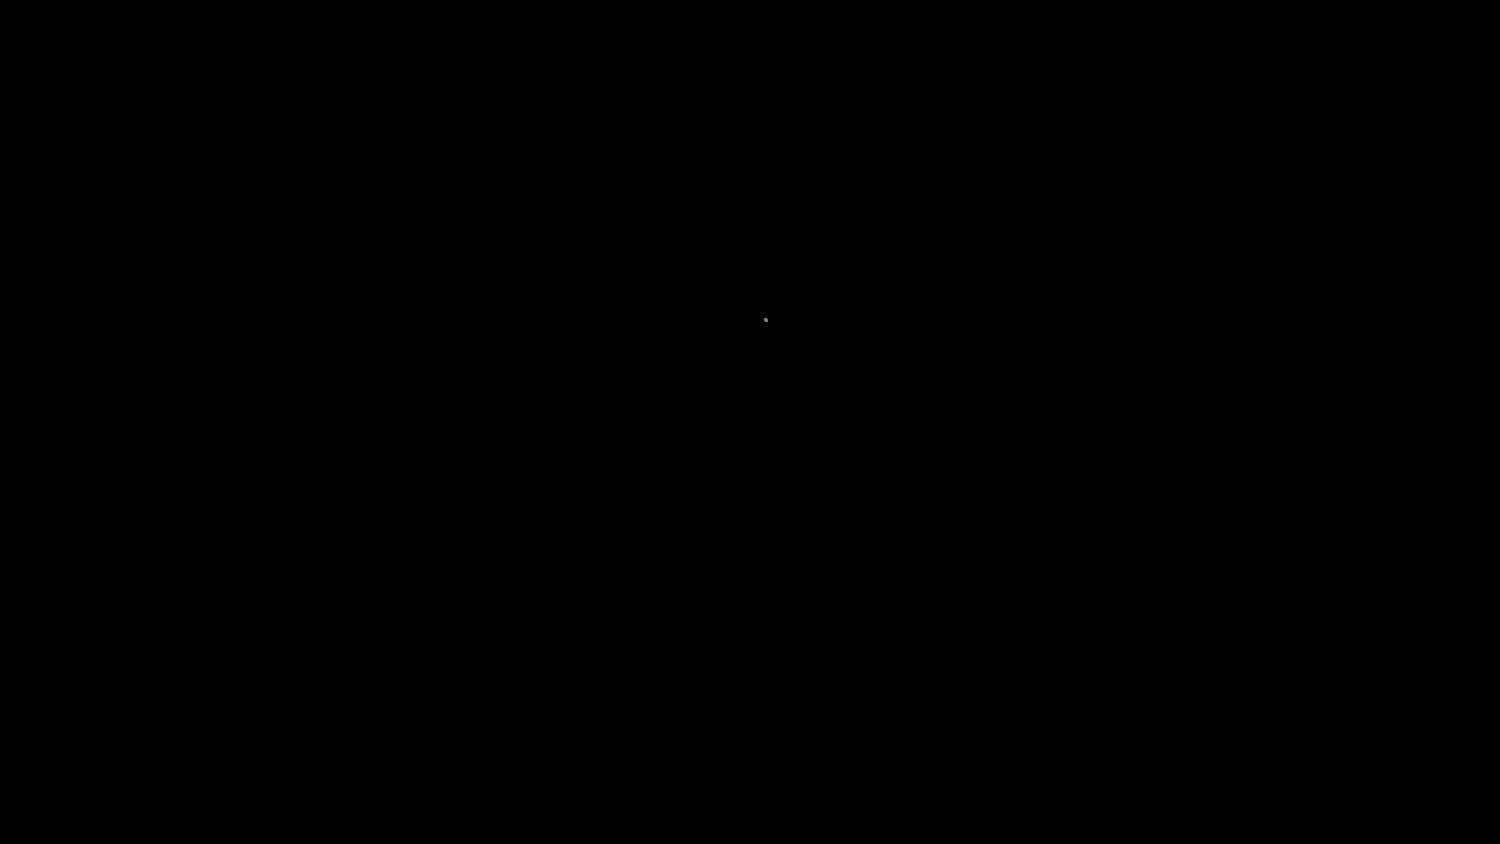 Sky Watching like always and recording all the stars I Could see with my phone. to my shock this star starts blinking like a plane after just being what looked not a night star. seconds later the star moves from two different sides of the sky. please watch full video. thank you.